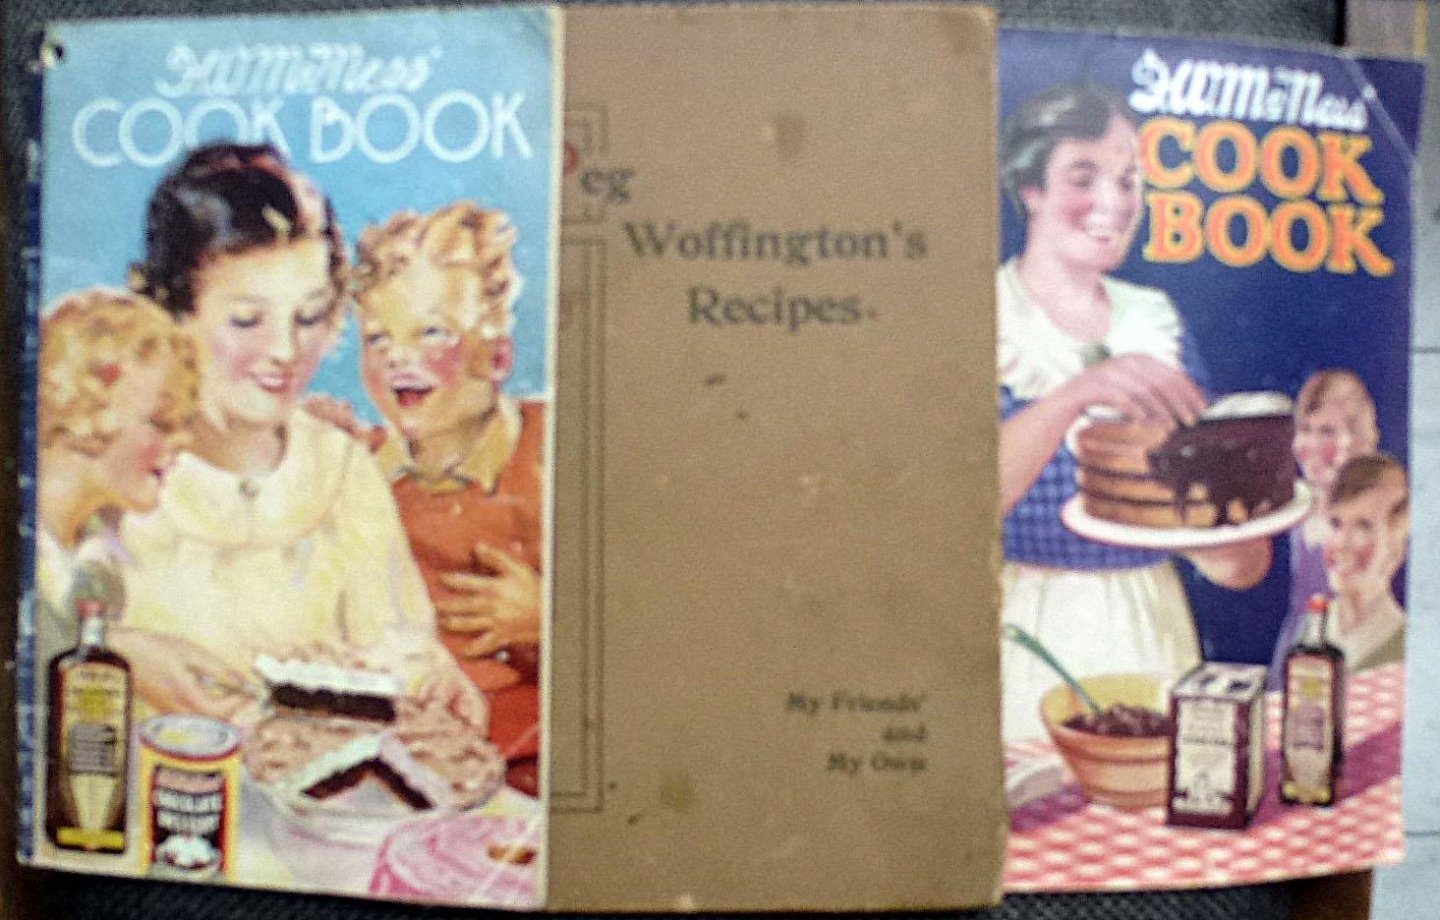 F.W. McNess Cook Book (2x) and Peg Woffington's Recipes. - F.W. McNess Cook Book (2x) and Peg Woffington's Recipes.